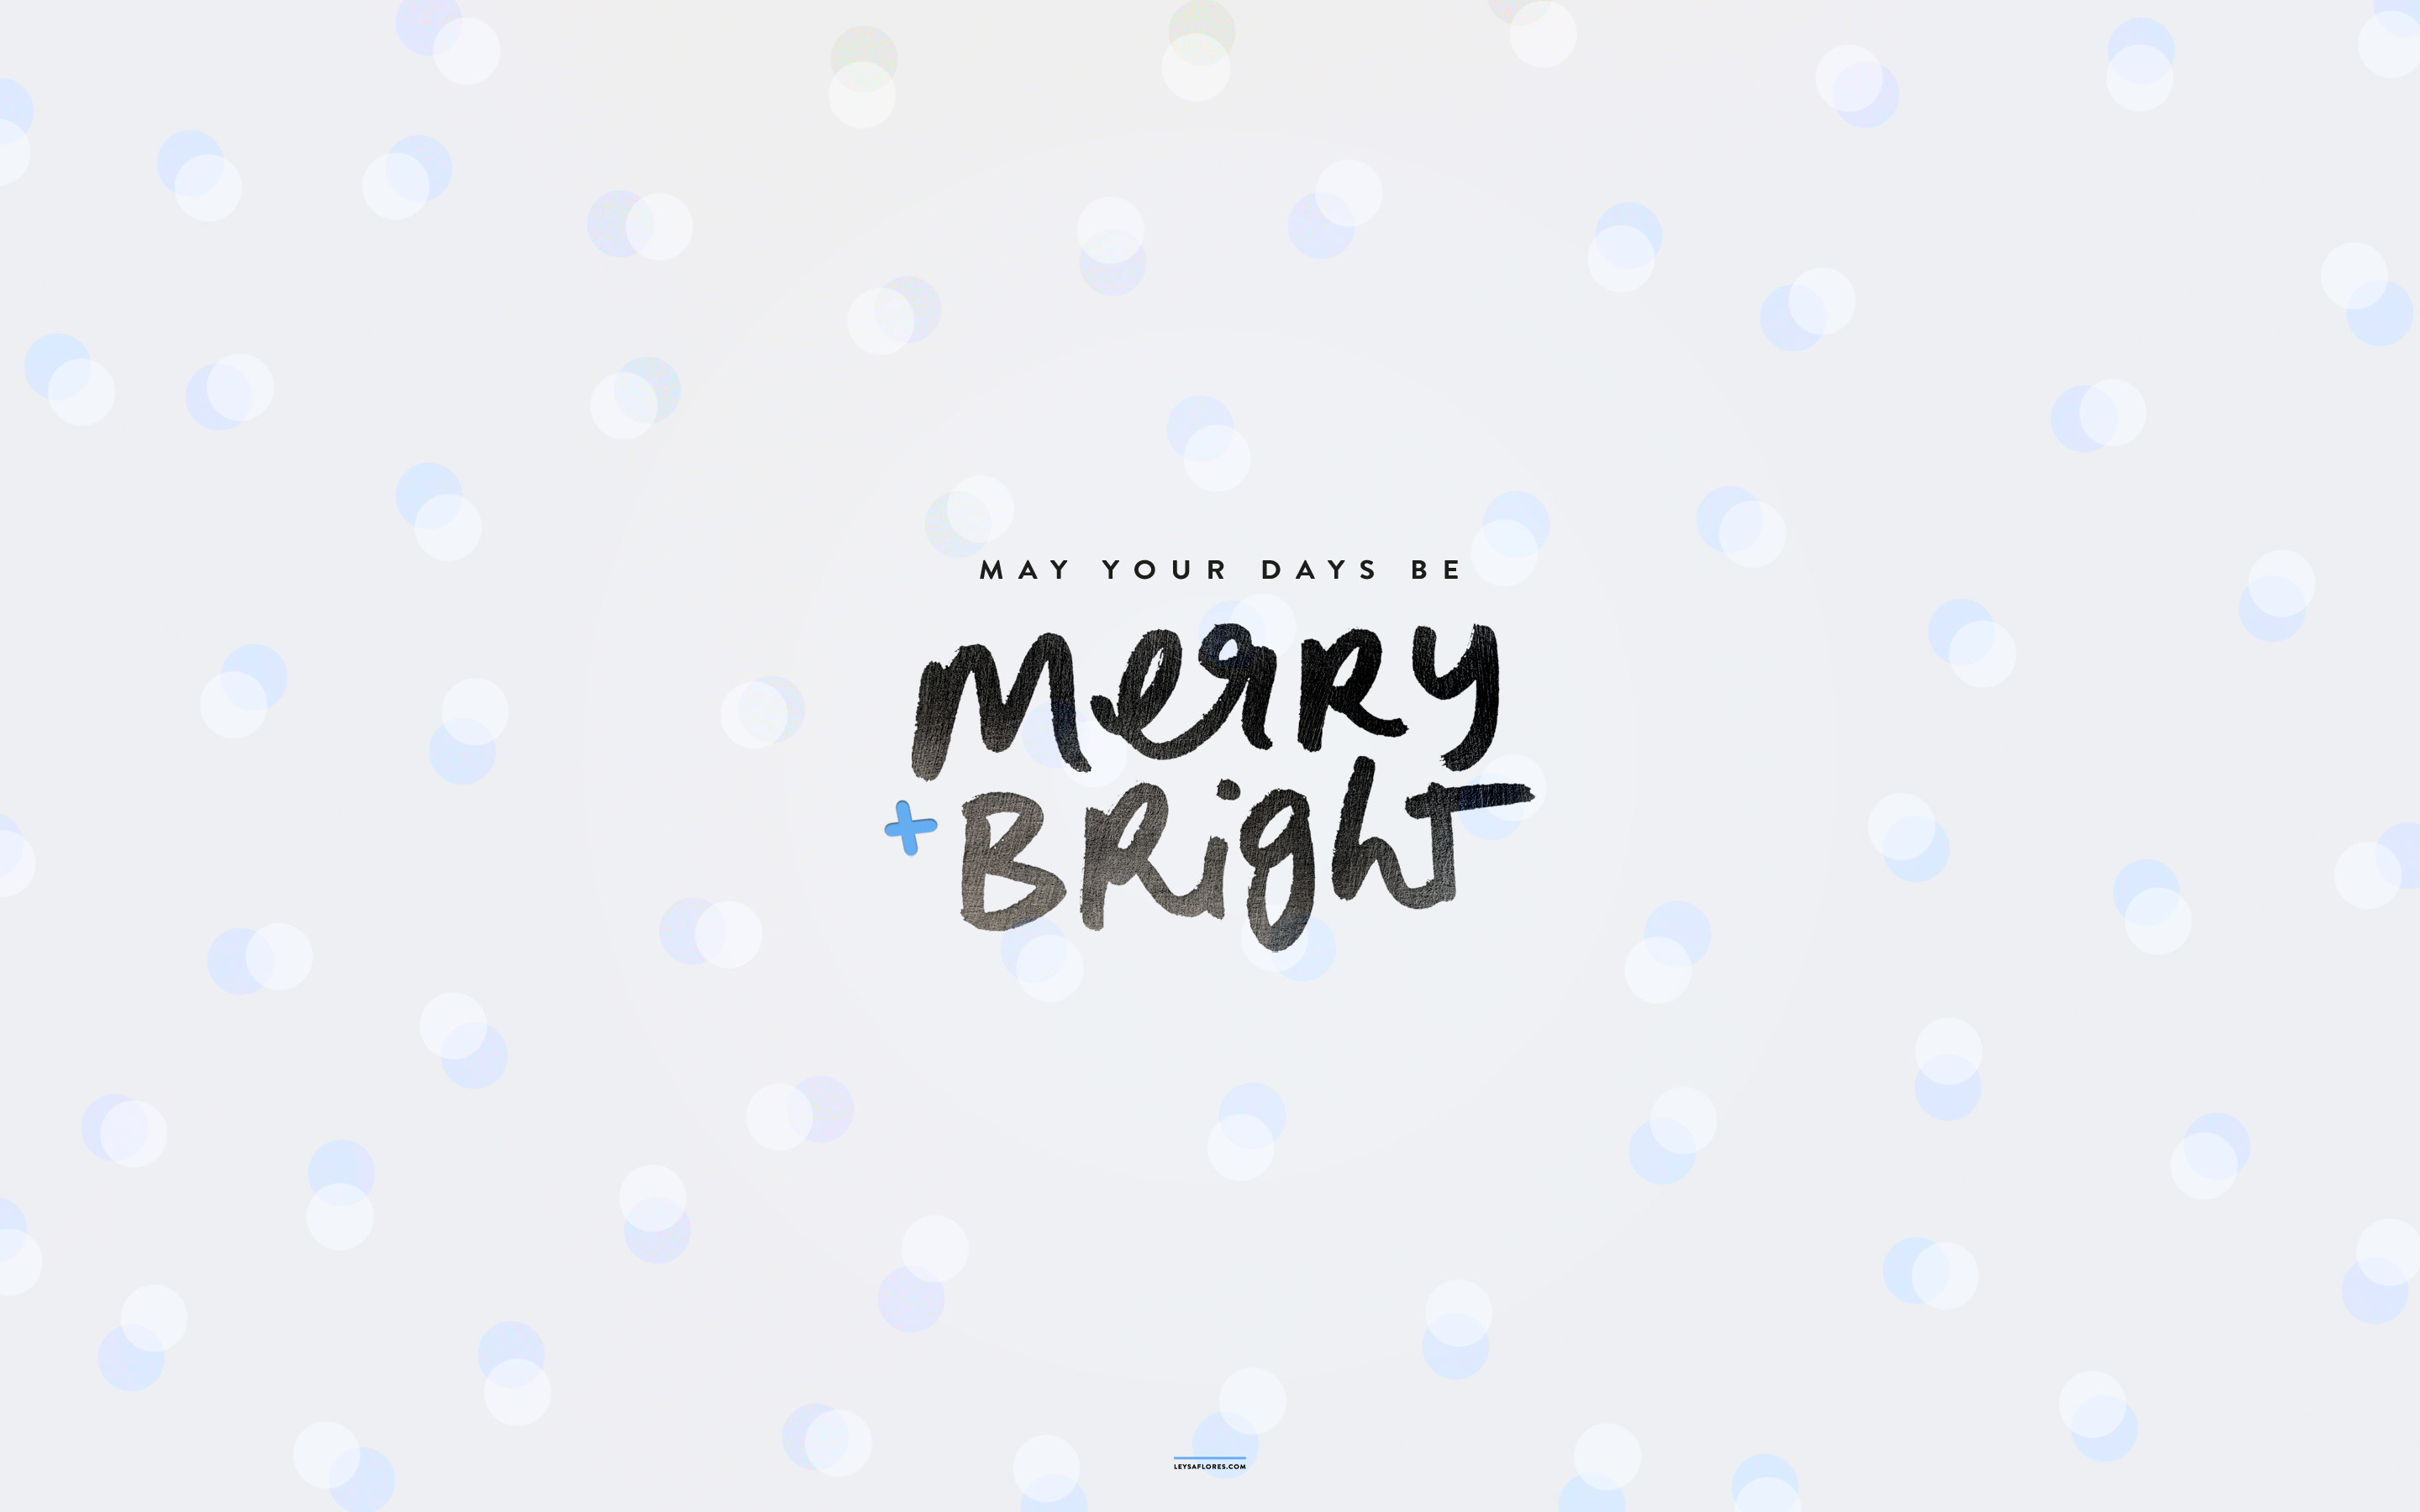 2880x1800 May your days be merry and bright / free desktop wallpaper download via  www.leysaflores